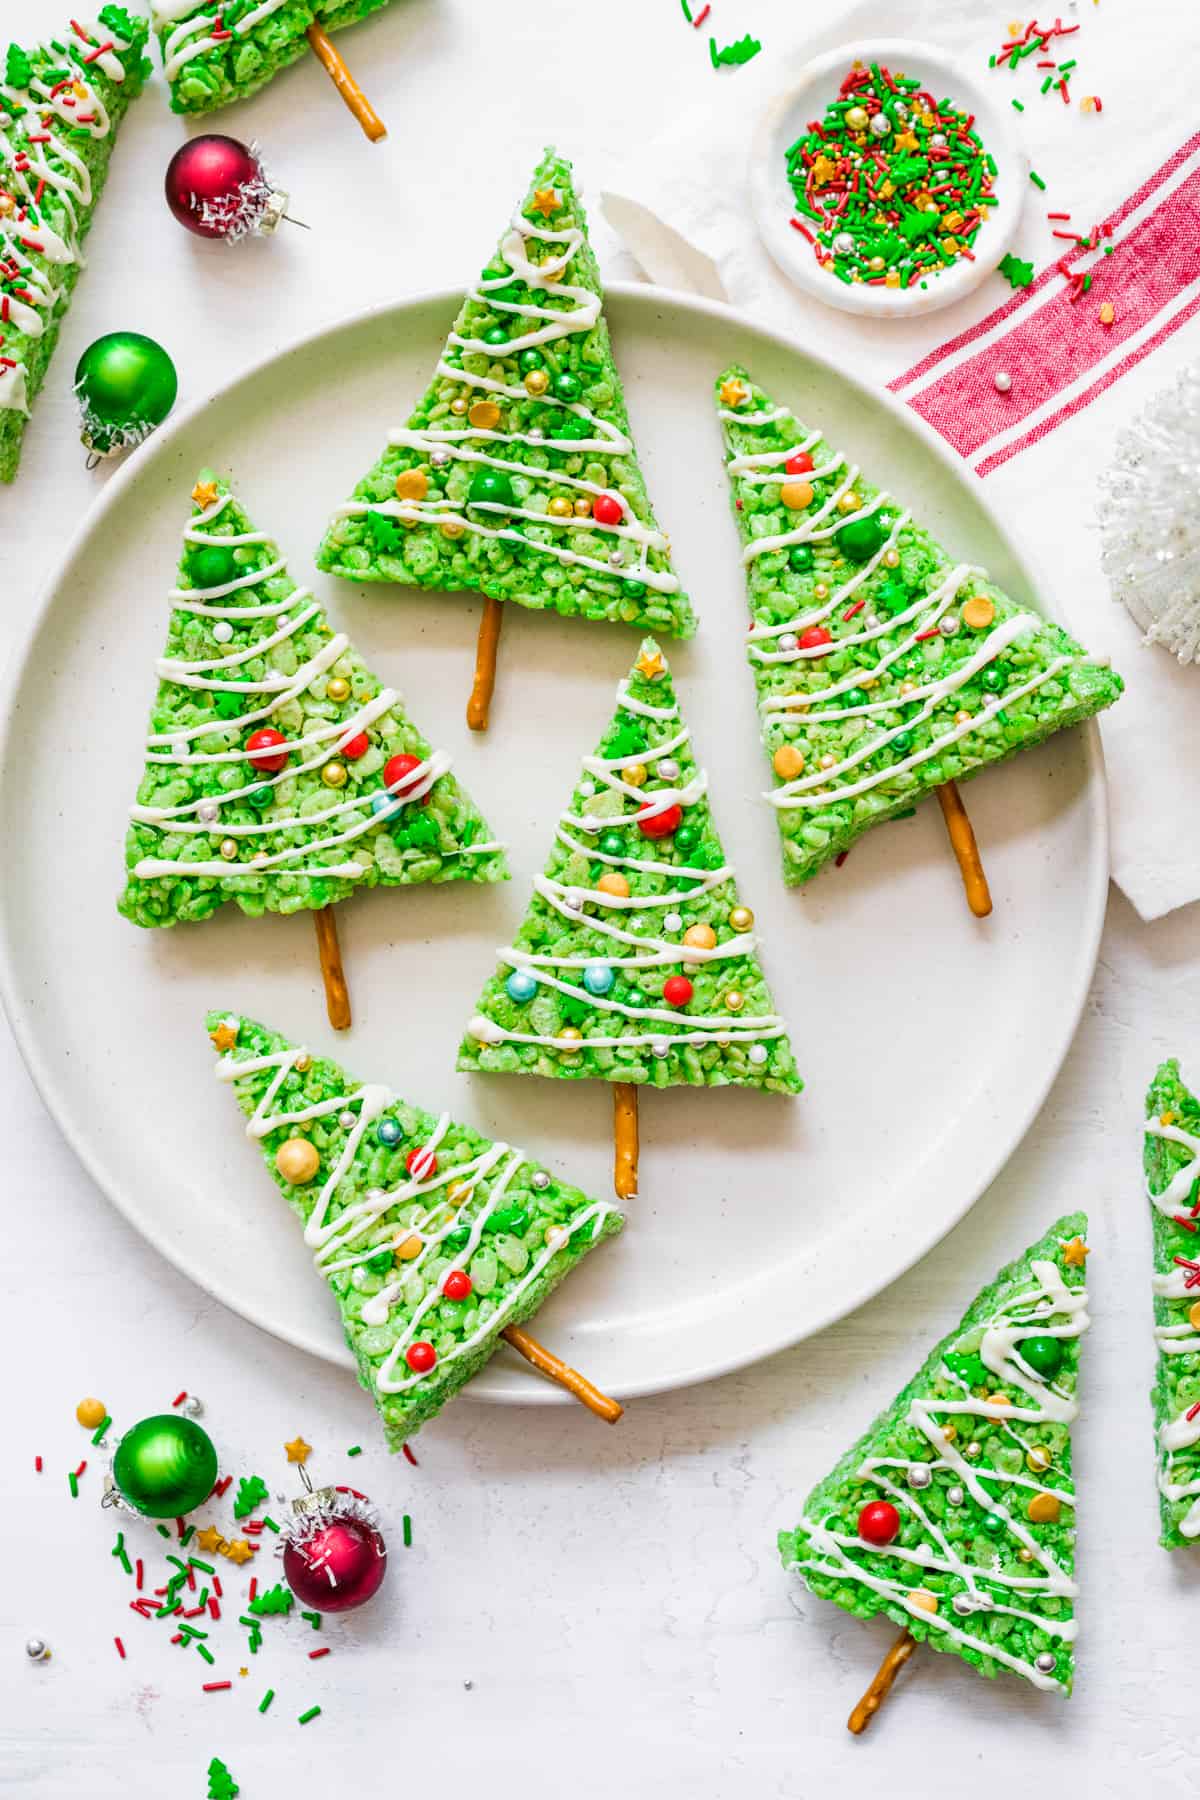 Green Rice Krispie treats decorated like Christmas trees on a plate from overhead.